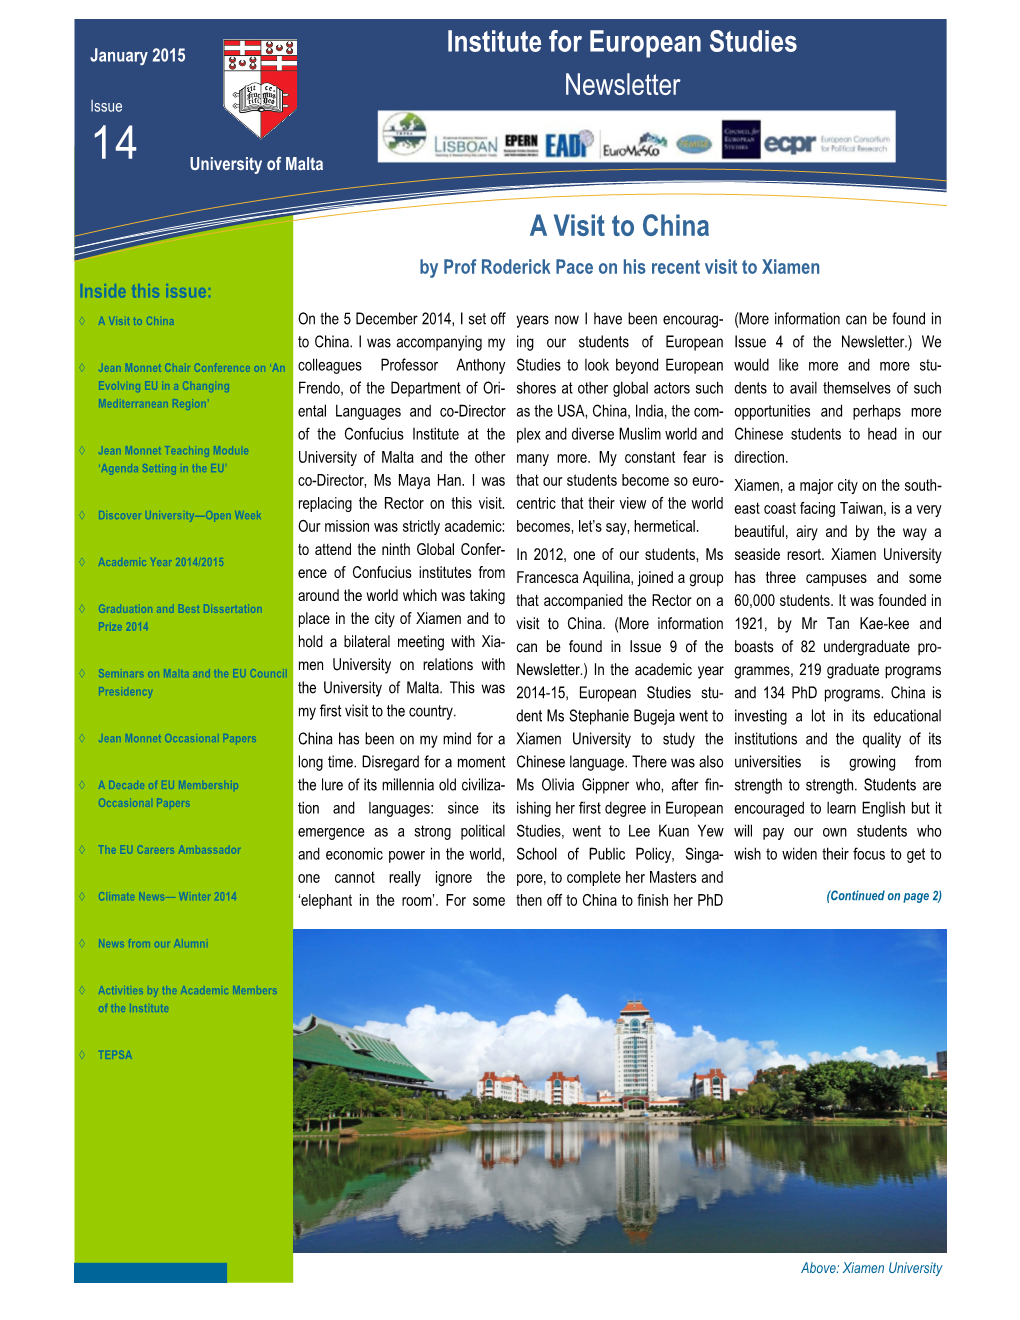 Institute for European Studies Newsletter a Visit to China